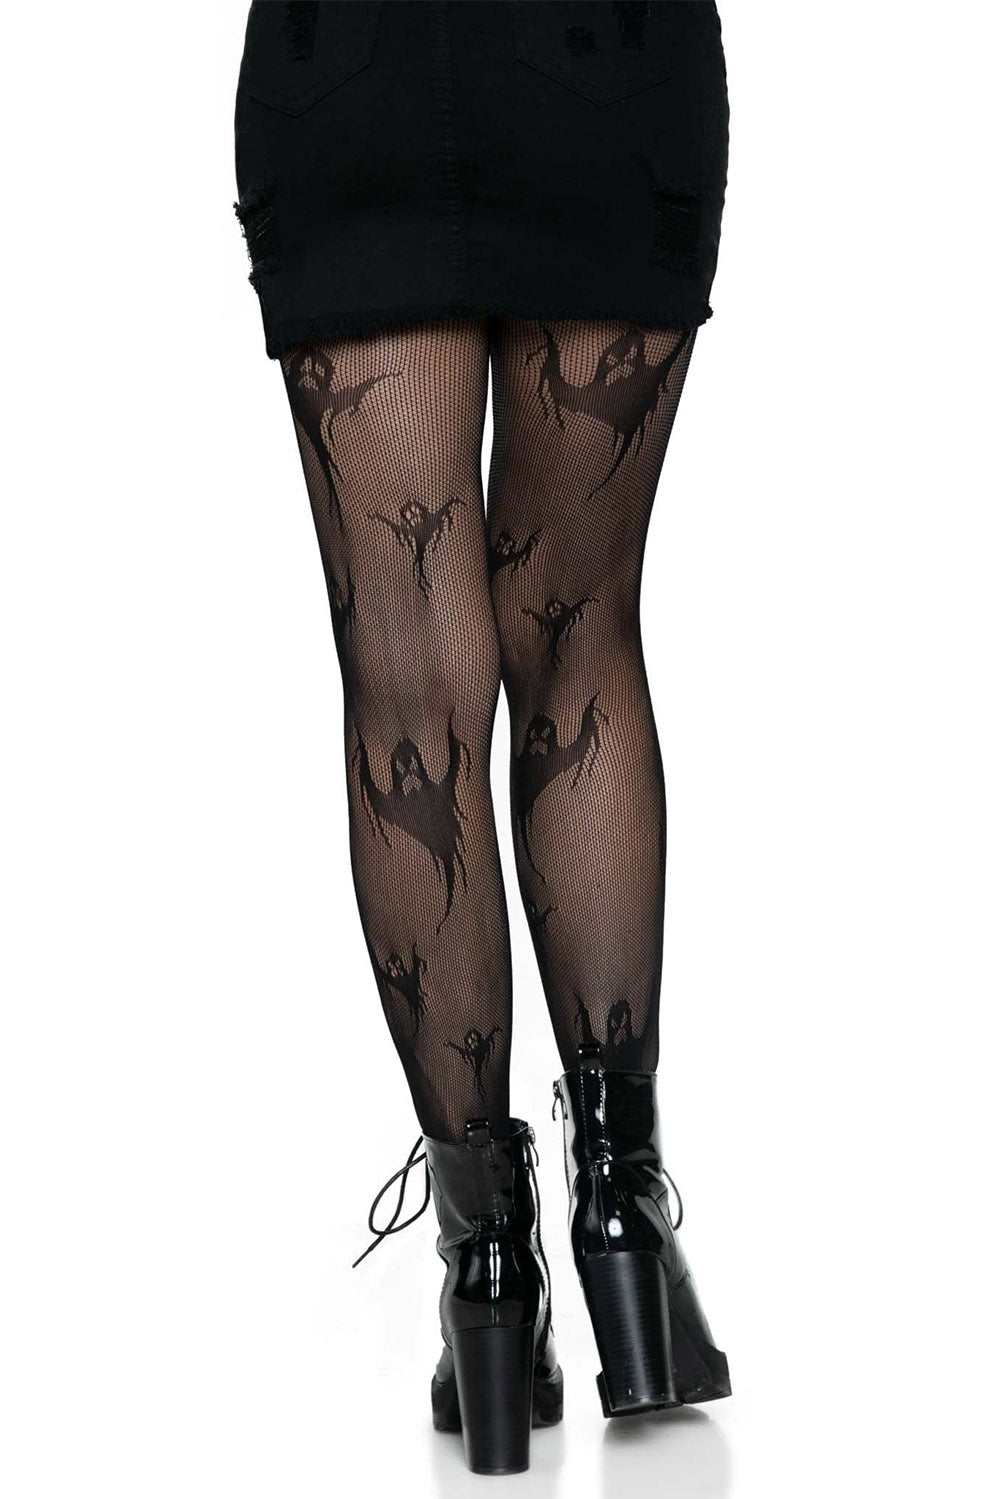 Get Ghosted Fishnet Tights